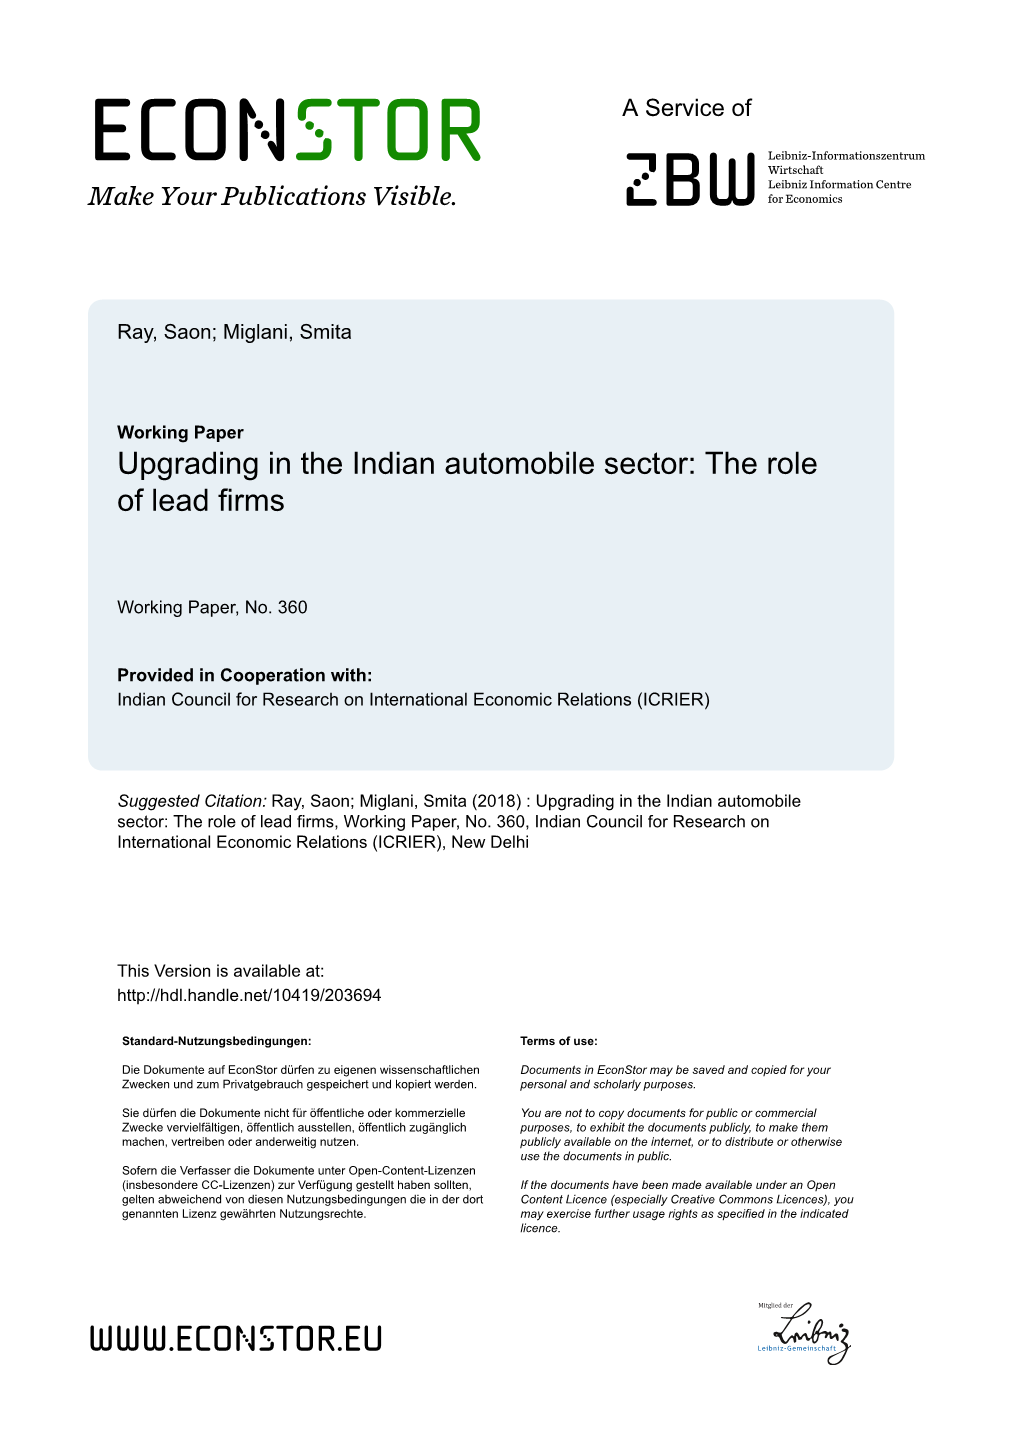 Upgrading in the Indian Automobile Sector: the Role of Lead Firms